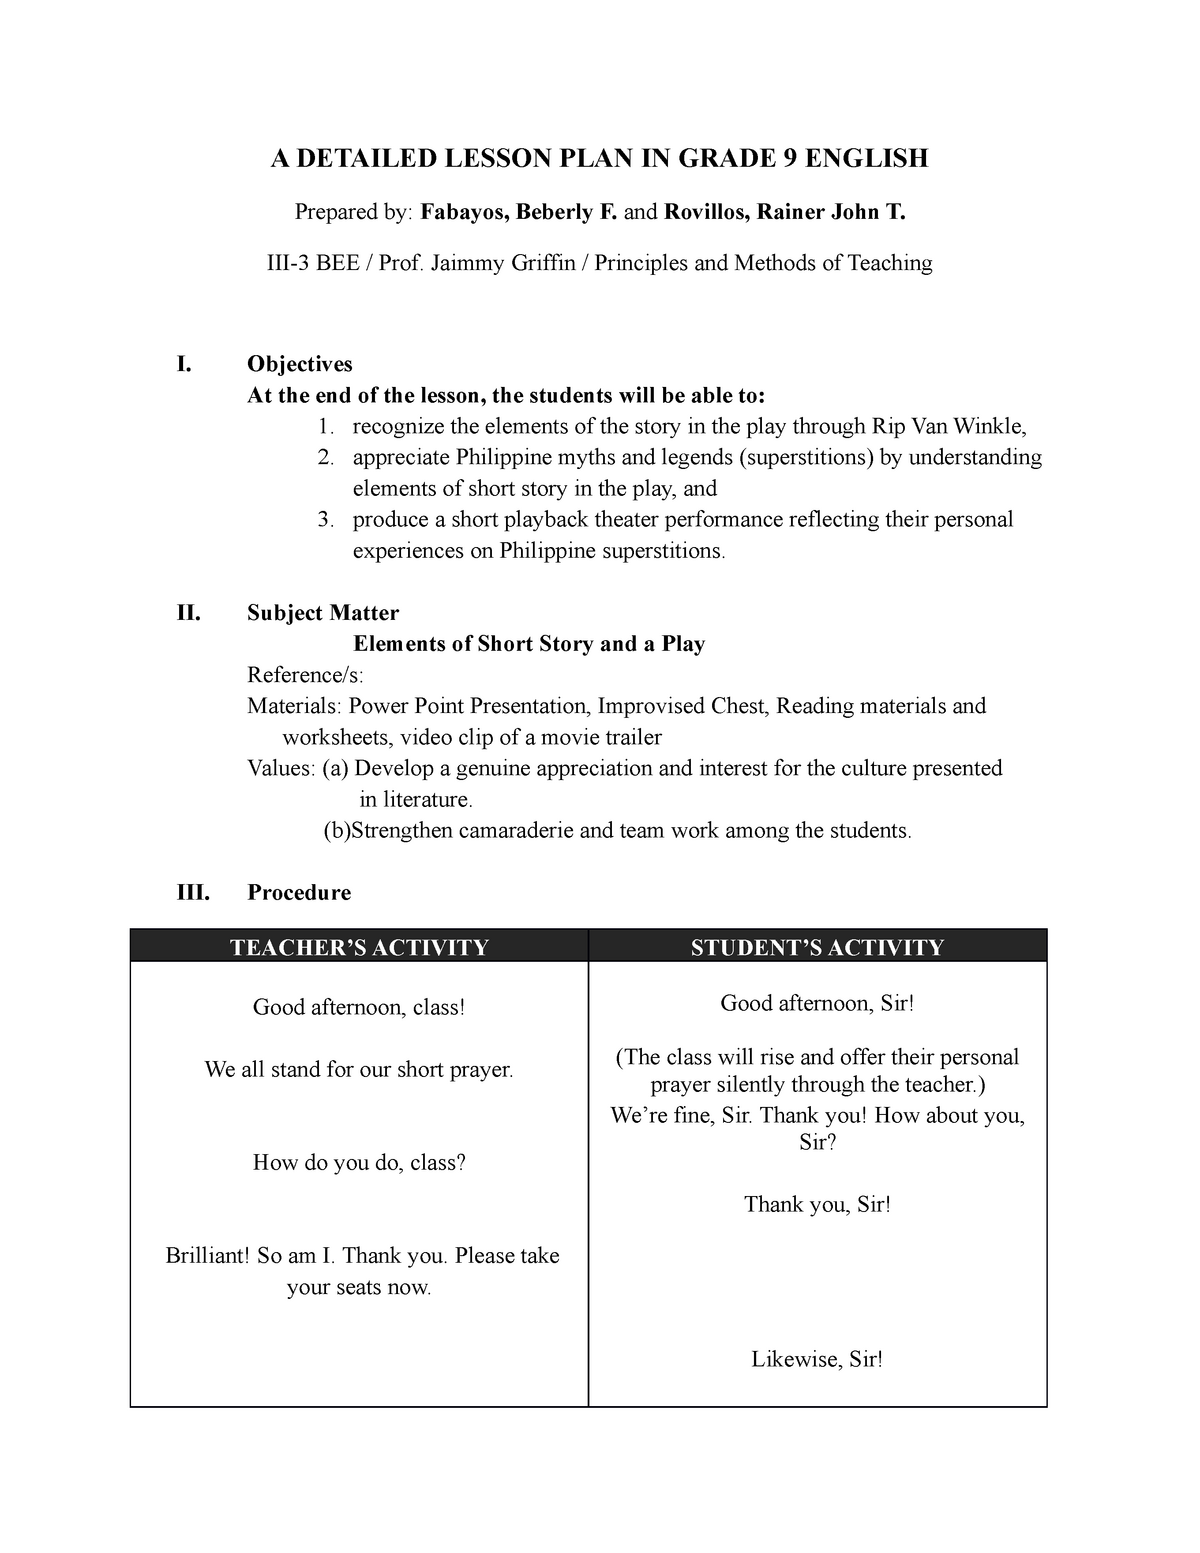 A Detailed Lesson Plan In Grade 9 Englis A Detailed Lesson Plan In